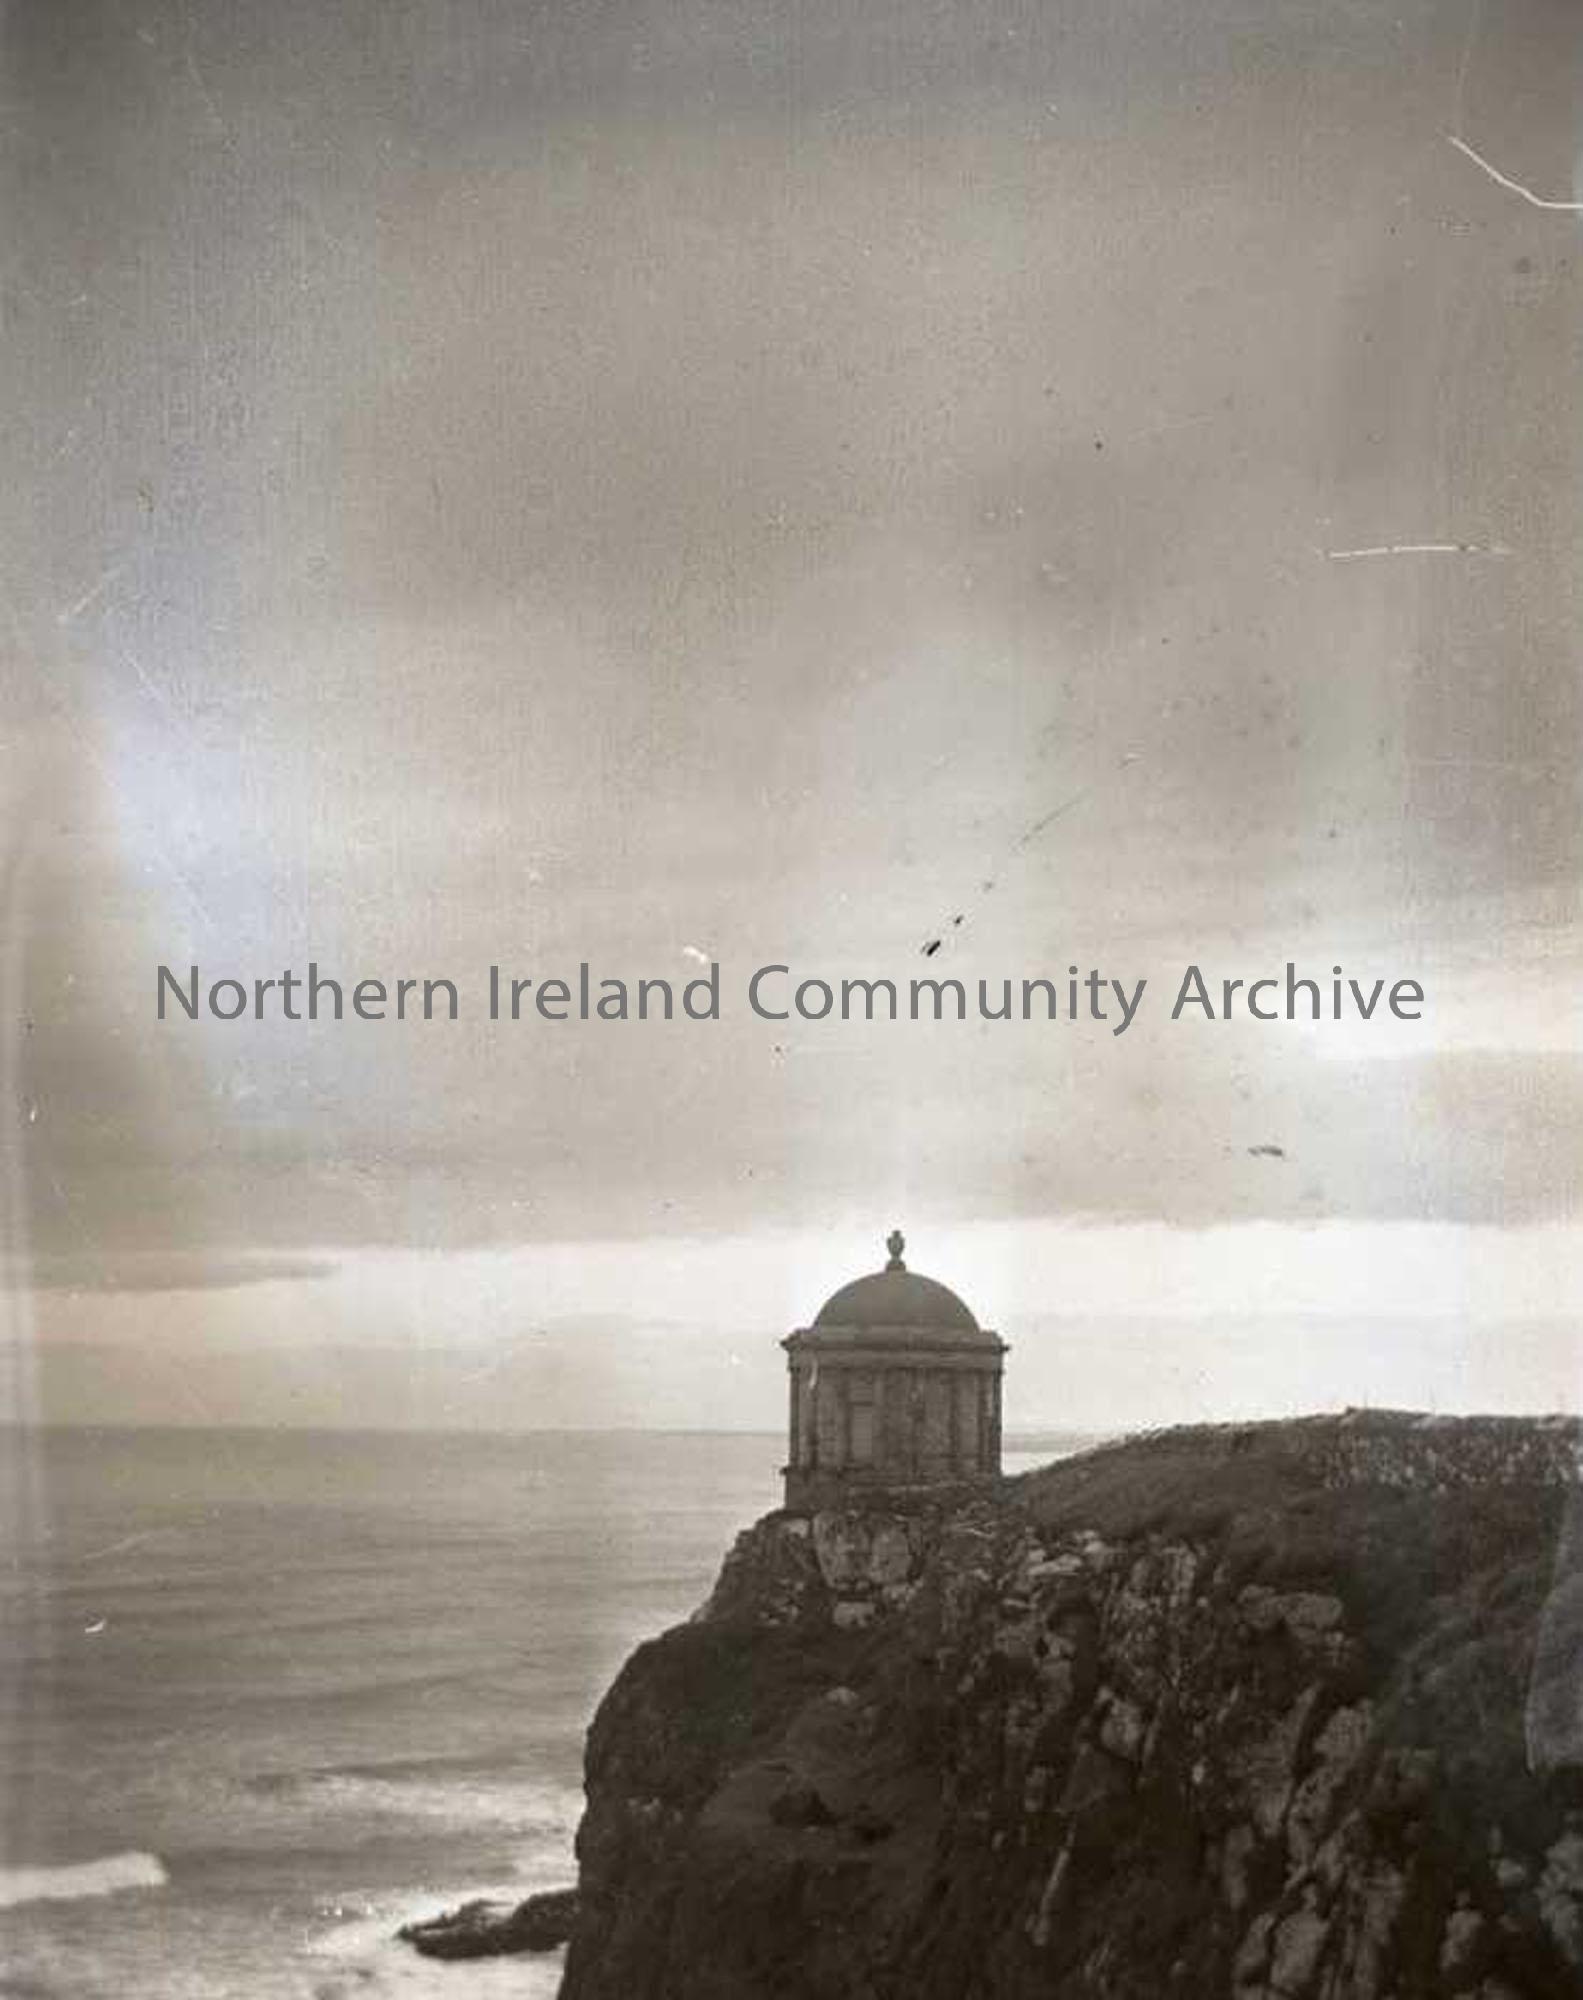 Mussenden Temple as titled by Sam Henry